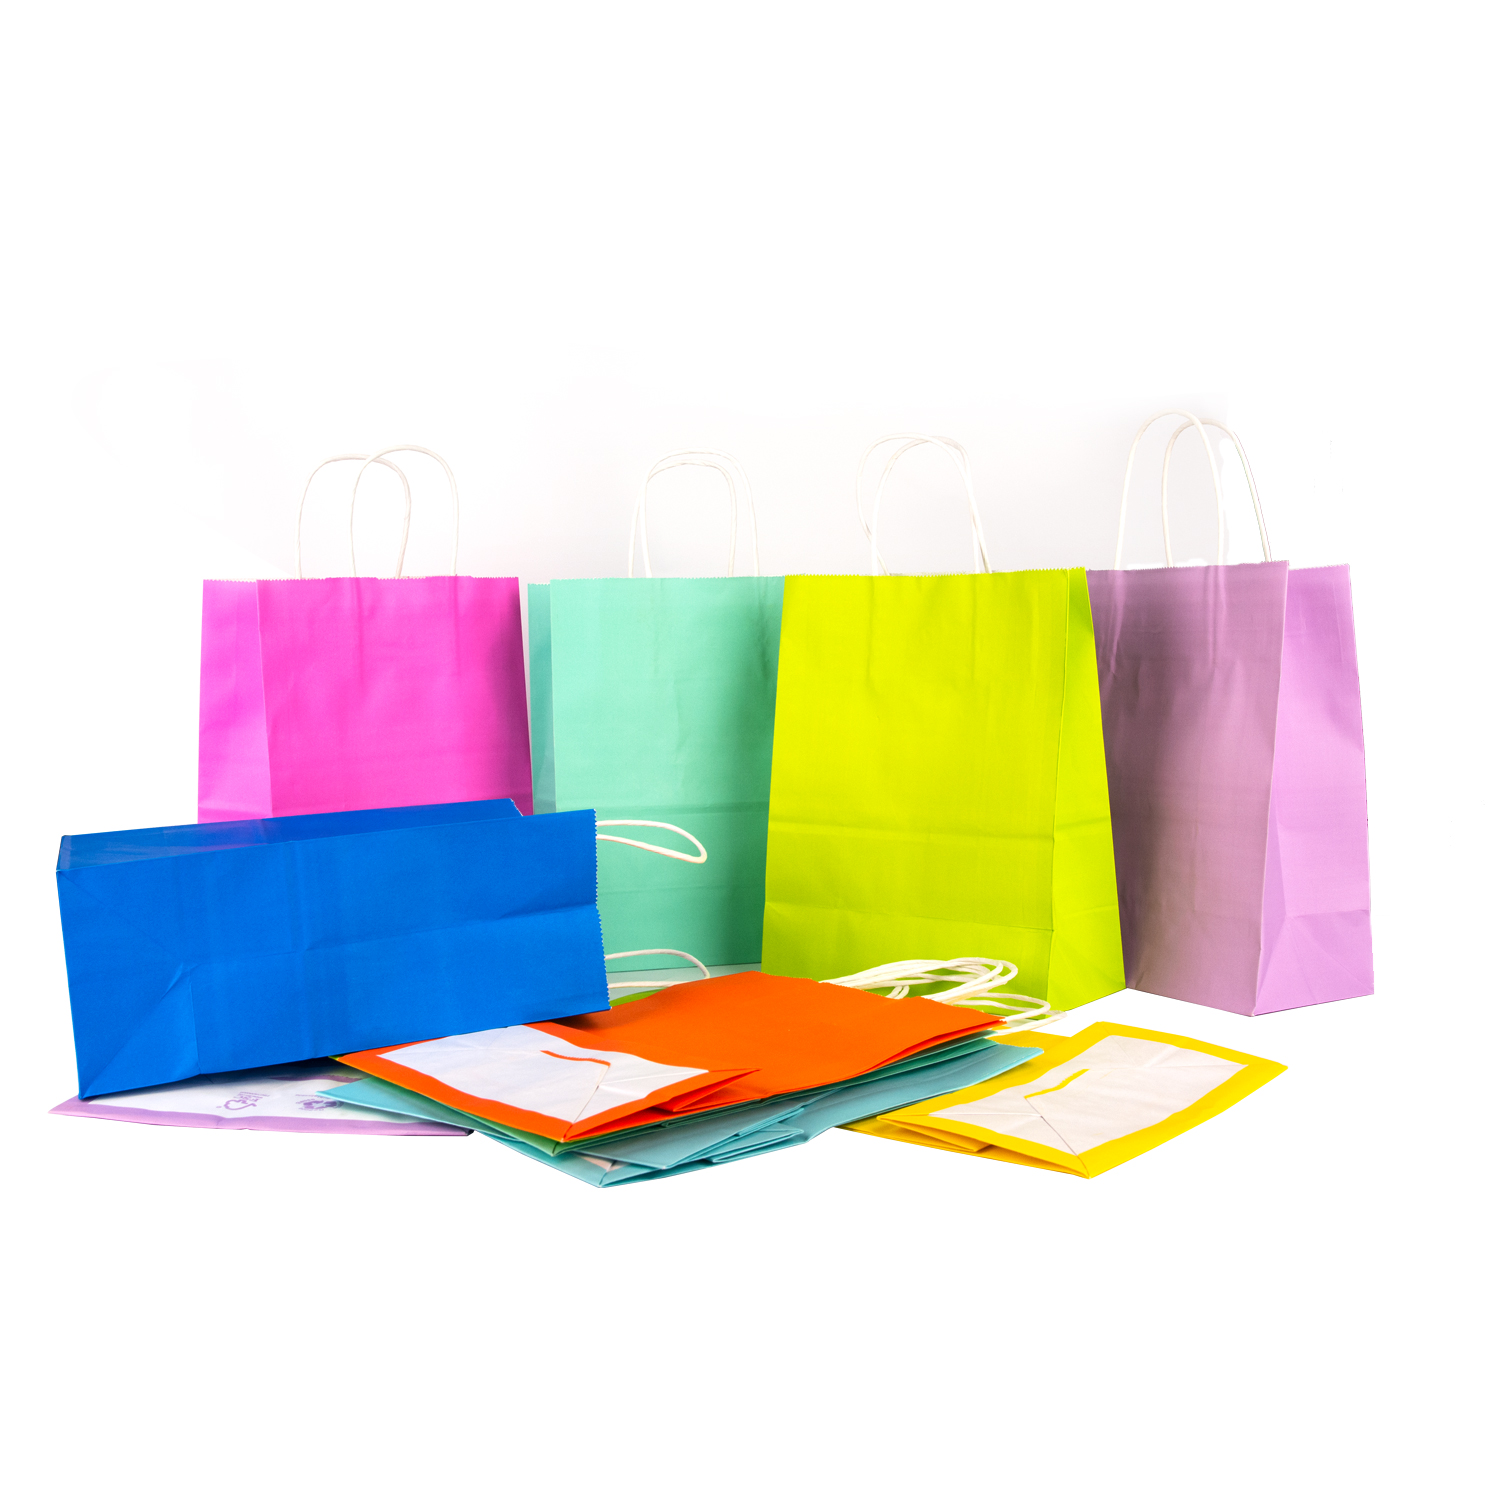 Soma Package Ltd Continues To Lead in Innovation with Sustainable Paper Bag Solutions